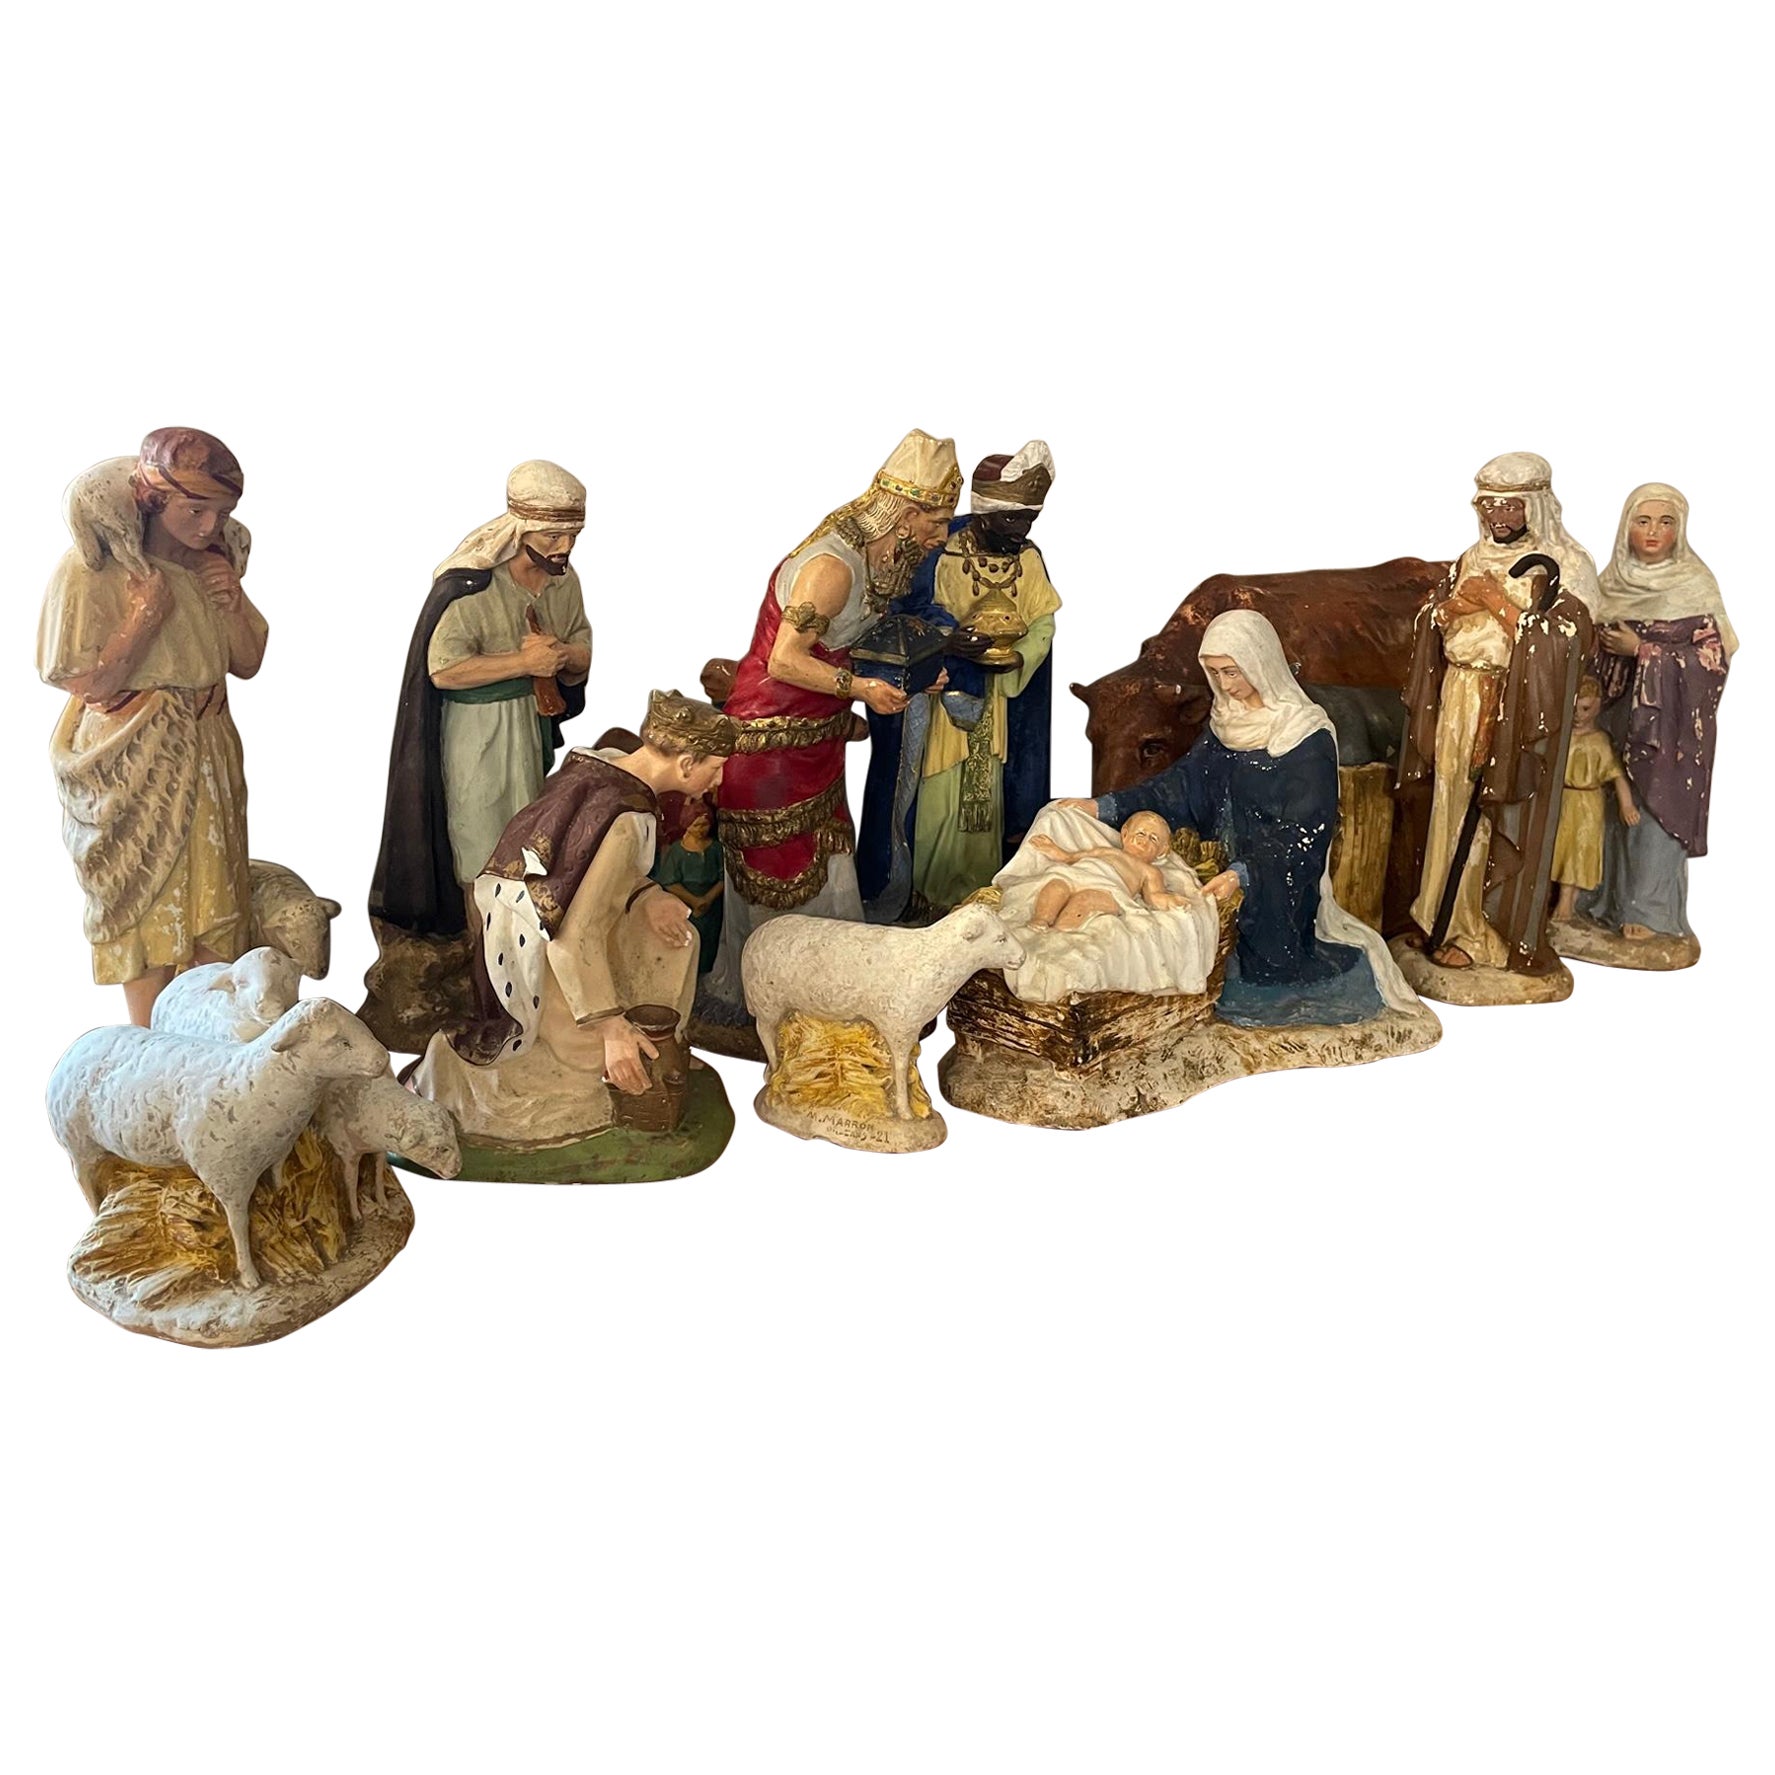 Early 20th century French Plaster Nativity Scene Figurines signed Marron, 1920s